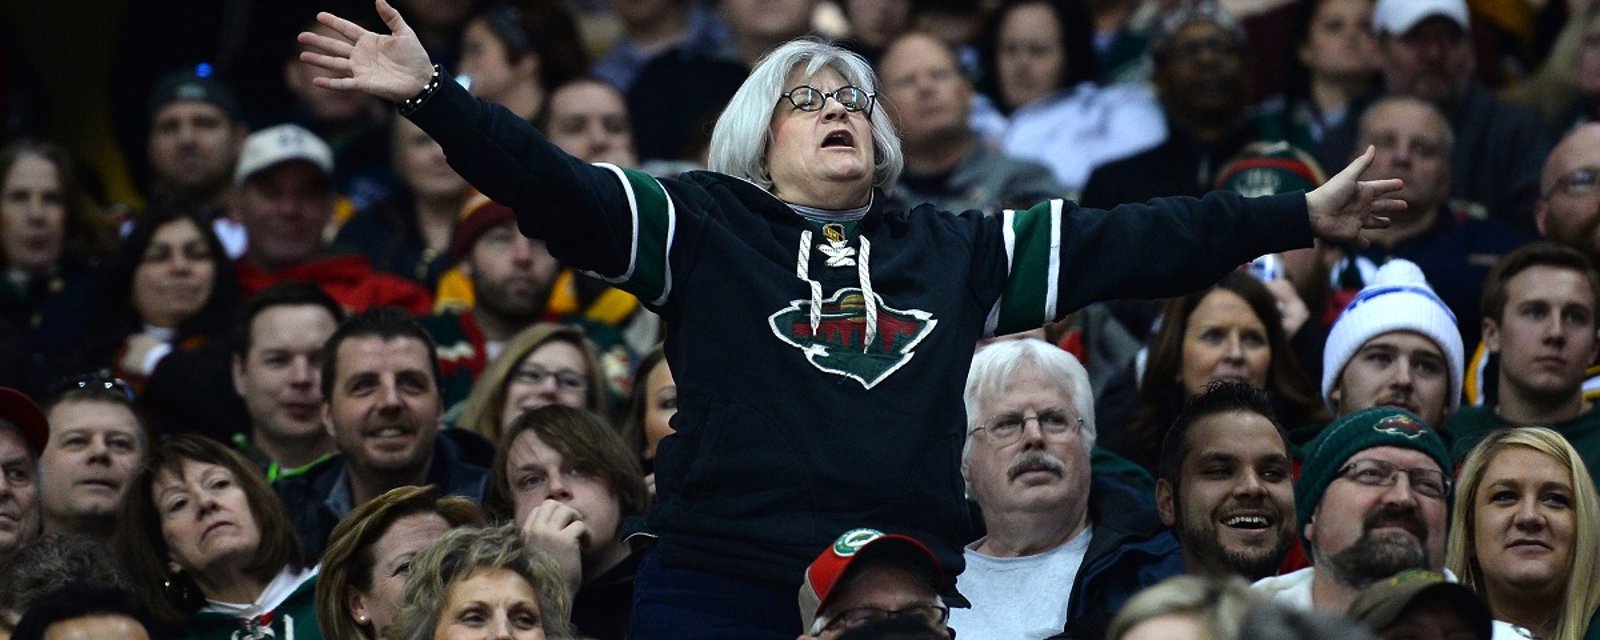 Minnesota Wild's years long sellout streak ends after terrible start to the season.